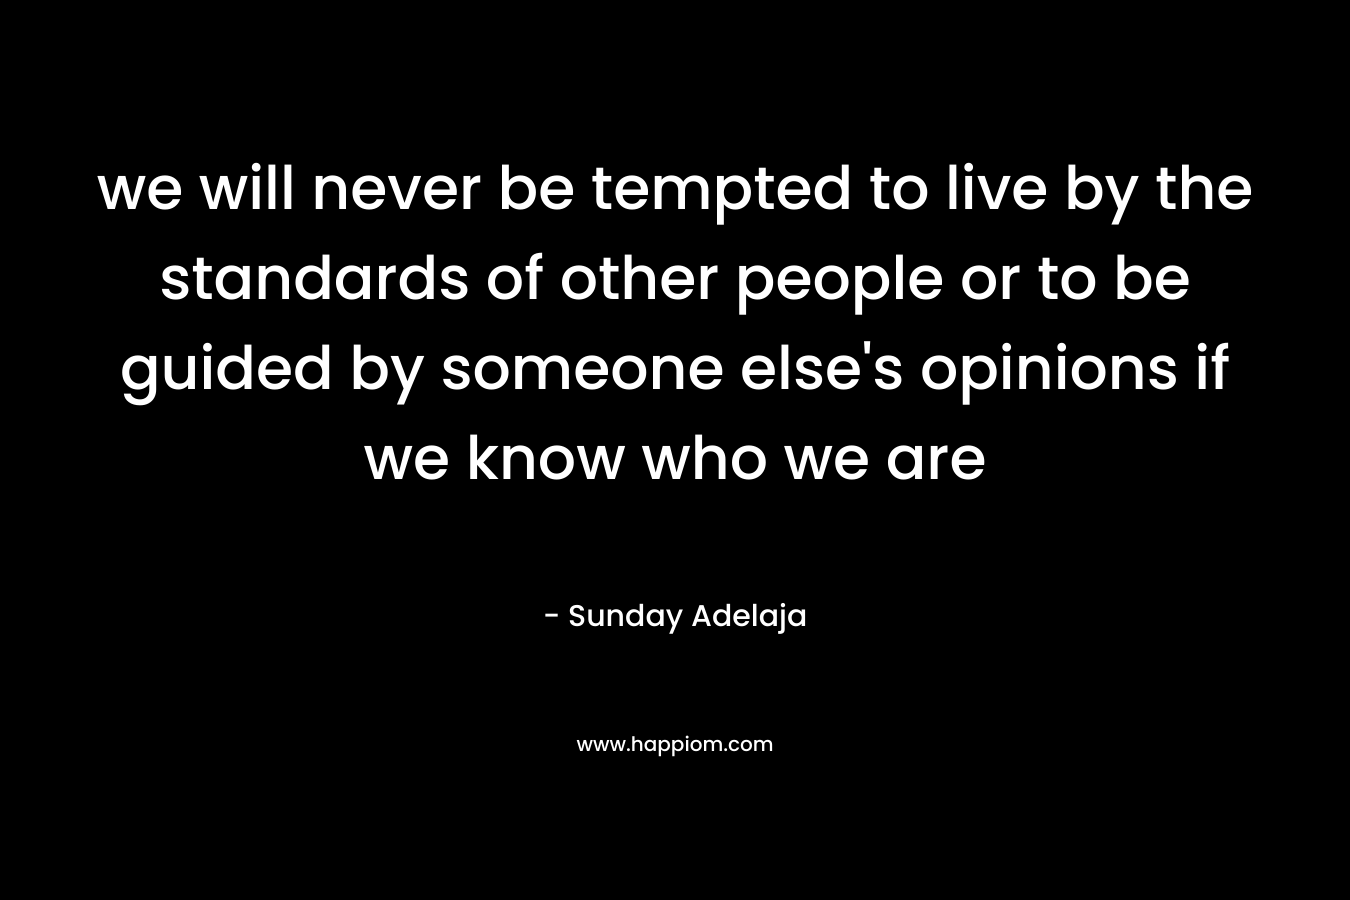 we will never be tempted to live by the standards of other people or to be guided by someone else's opinions if we know who we are